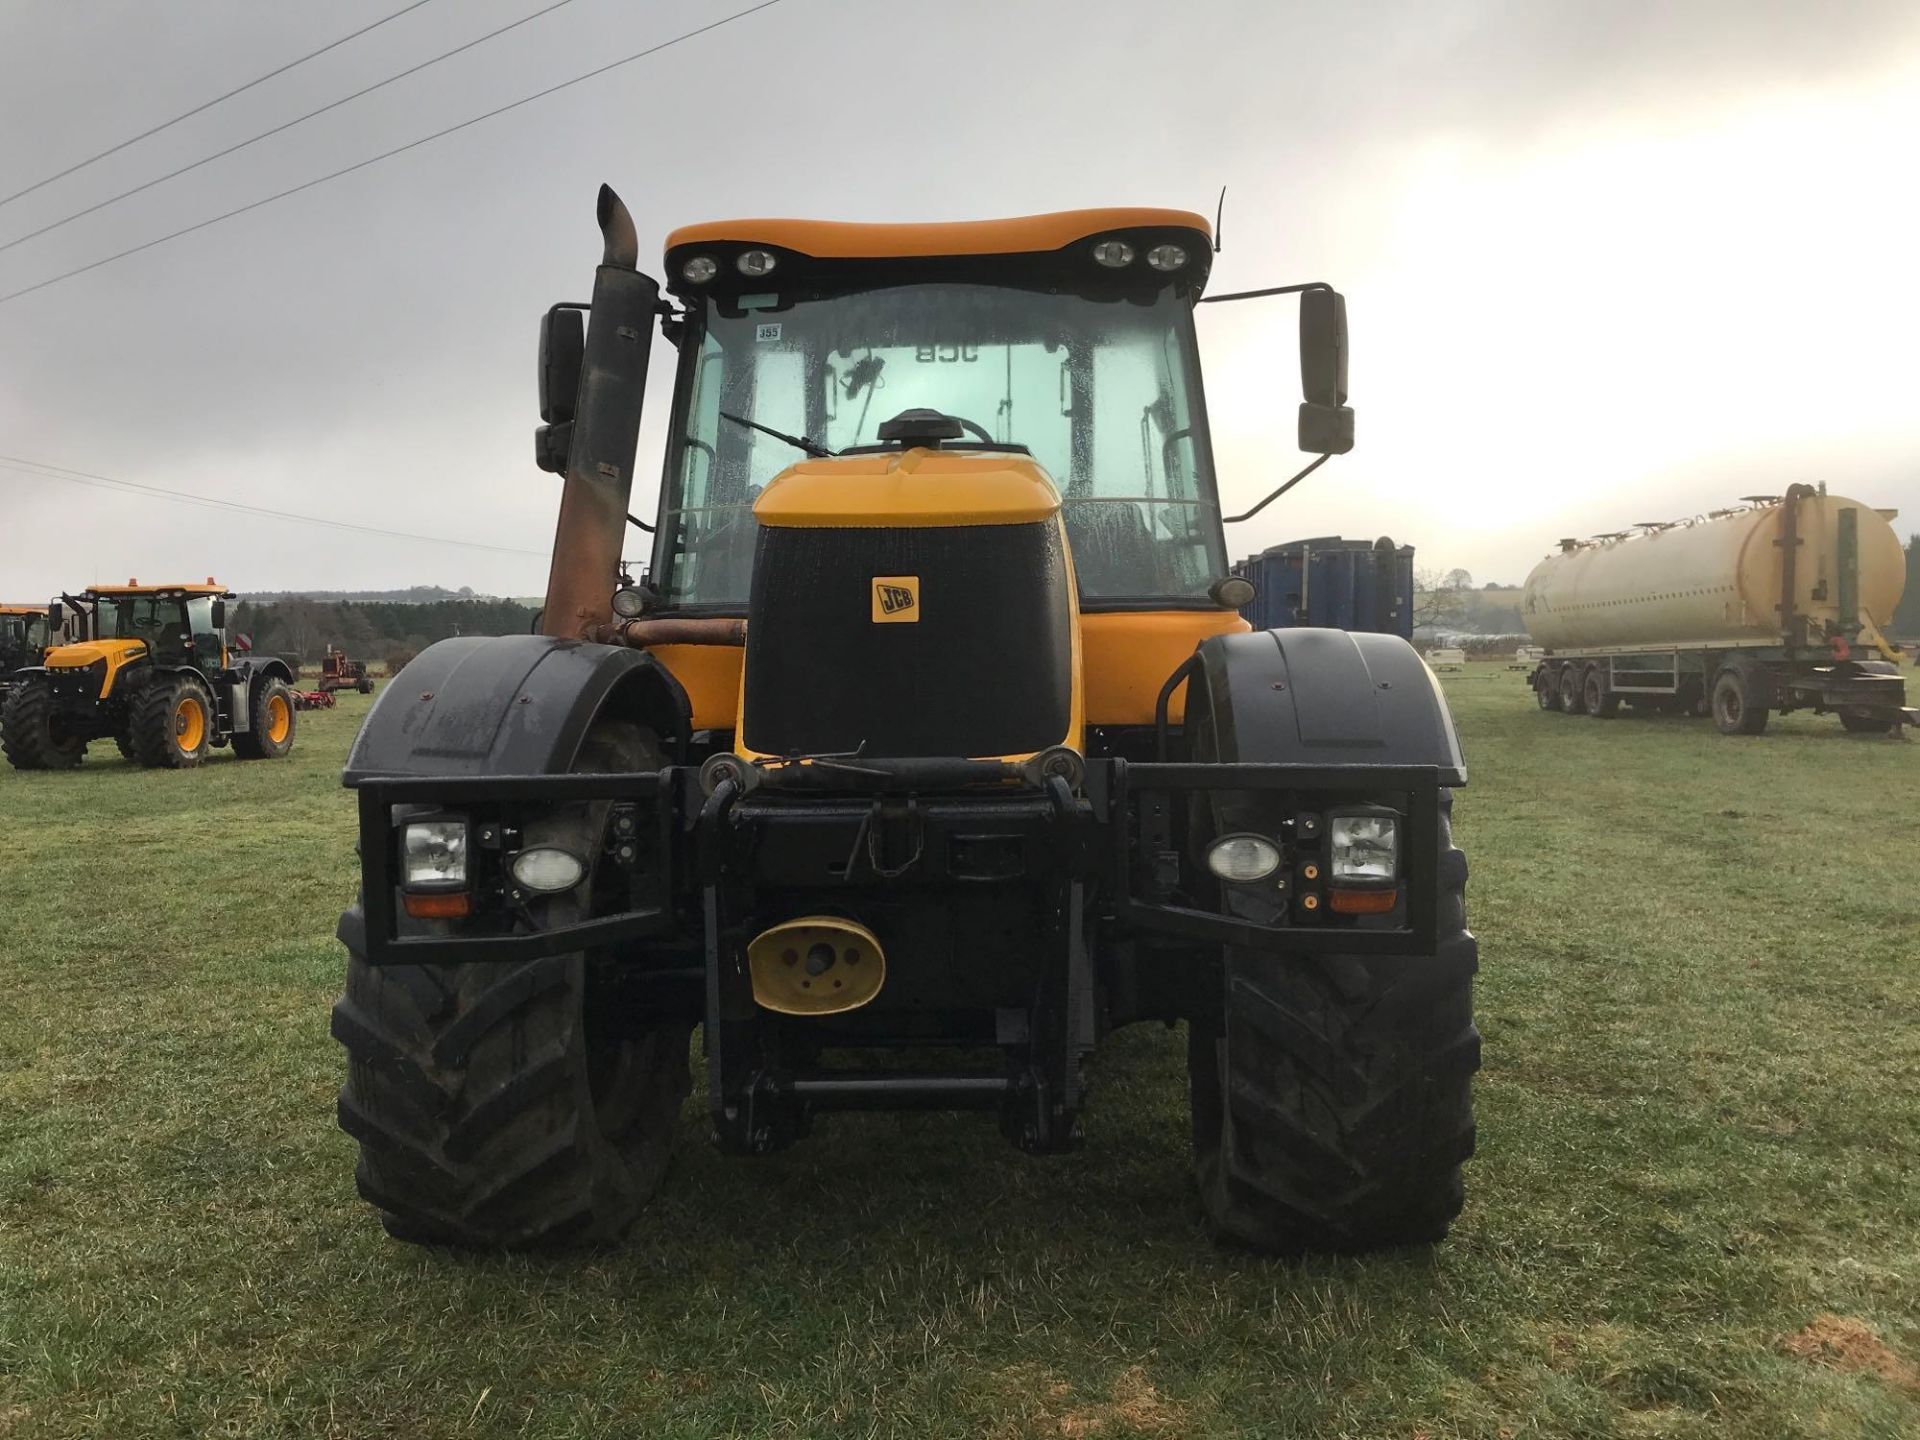 2008 JCB Fastrac 3200 with plus pack, 65kph, 3 rear spool valves. Datatagged. Front linkage. Front P